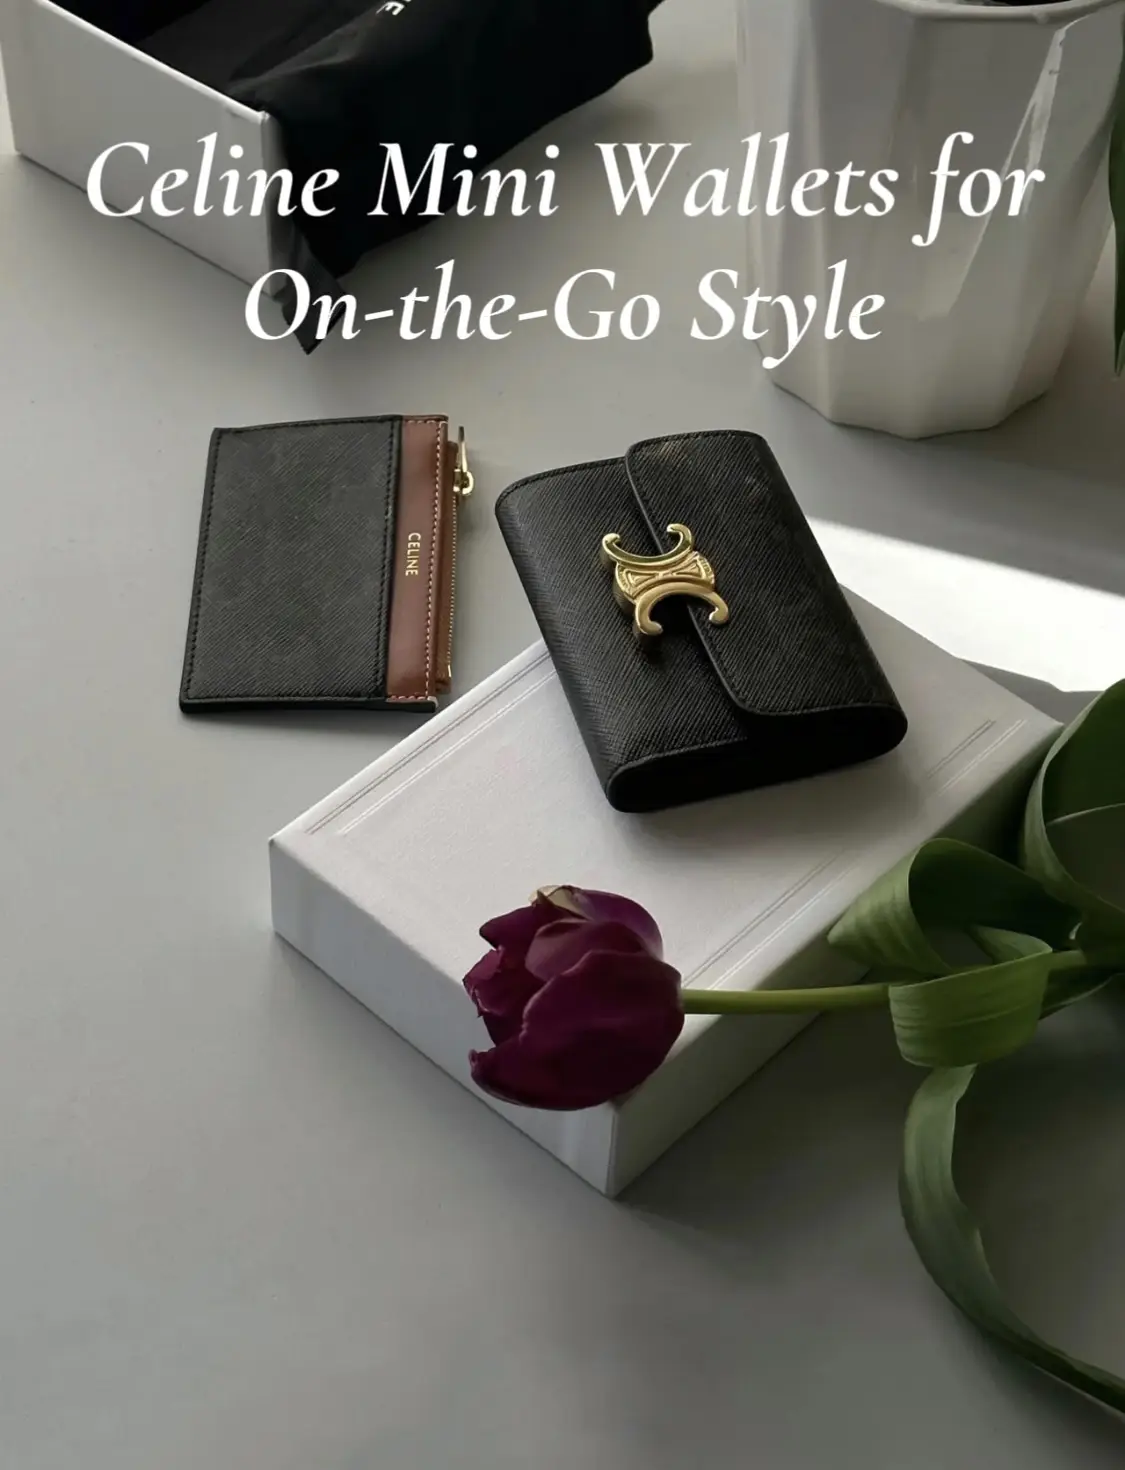 Celine Mini Wallets for On-the-Go Style | Gallery posted by Elliah